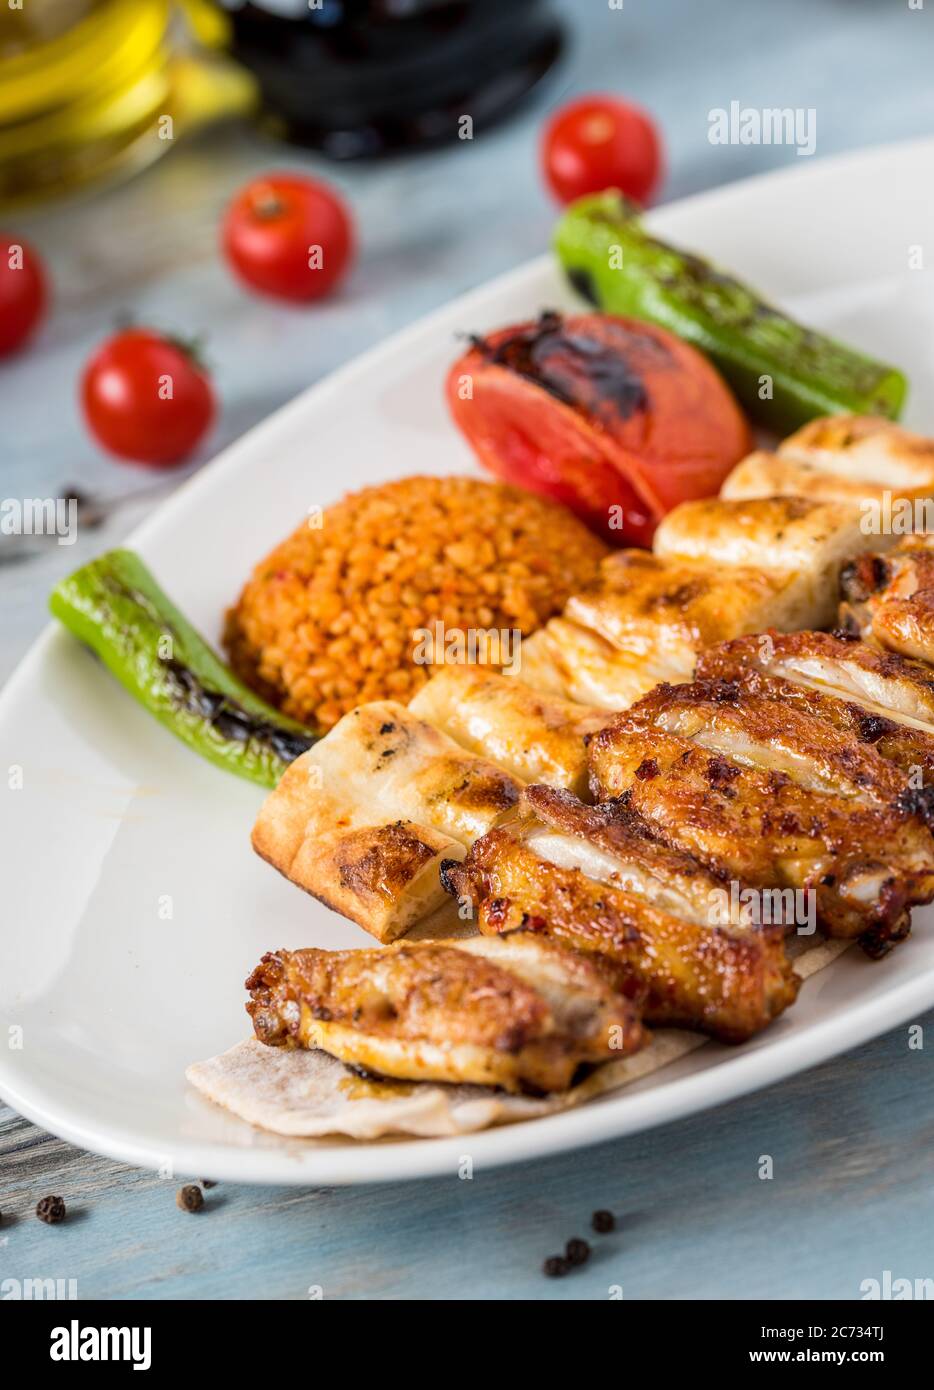 Turkish cuisine chicken wings grill. Grilled chicken wings on wooden background Stock Photo